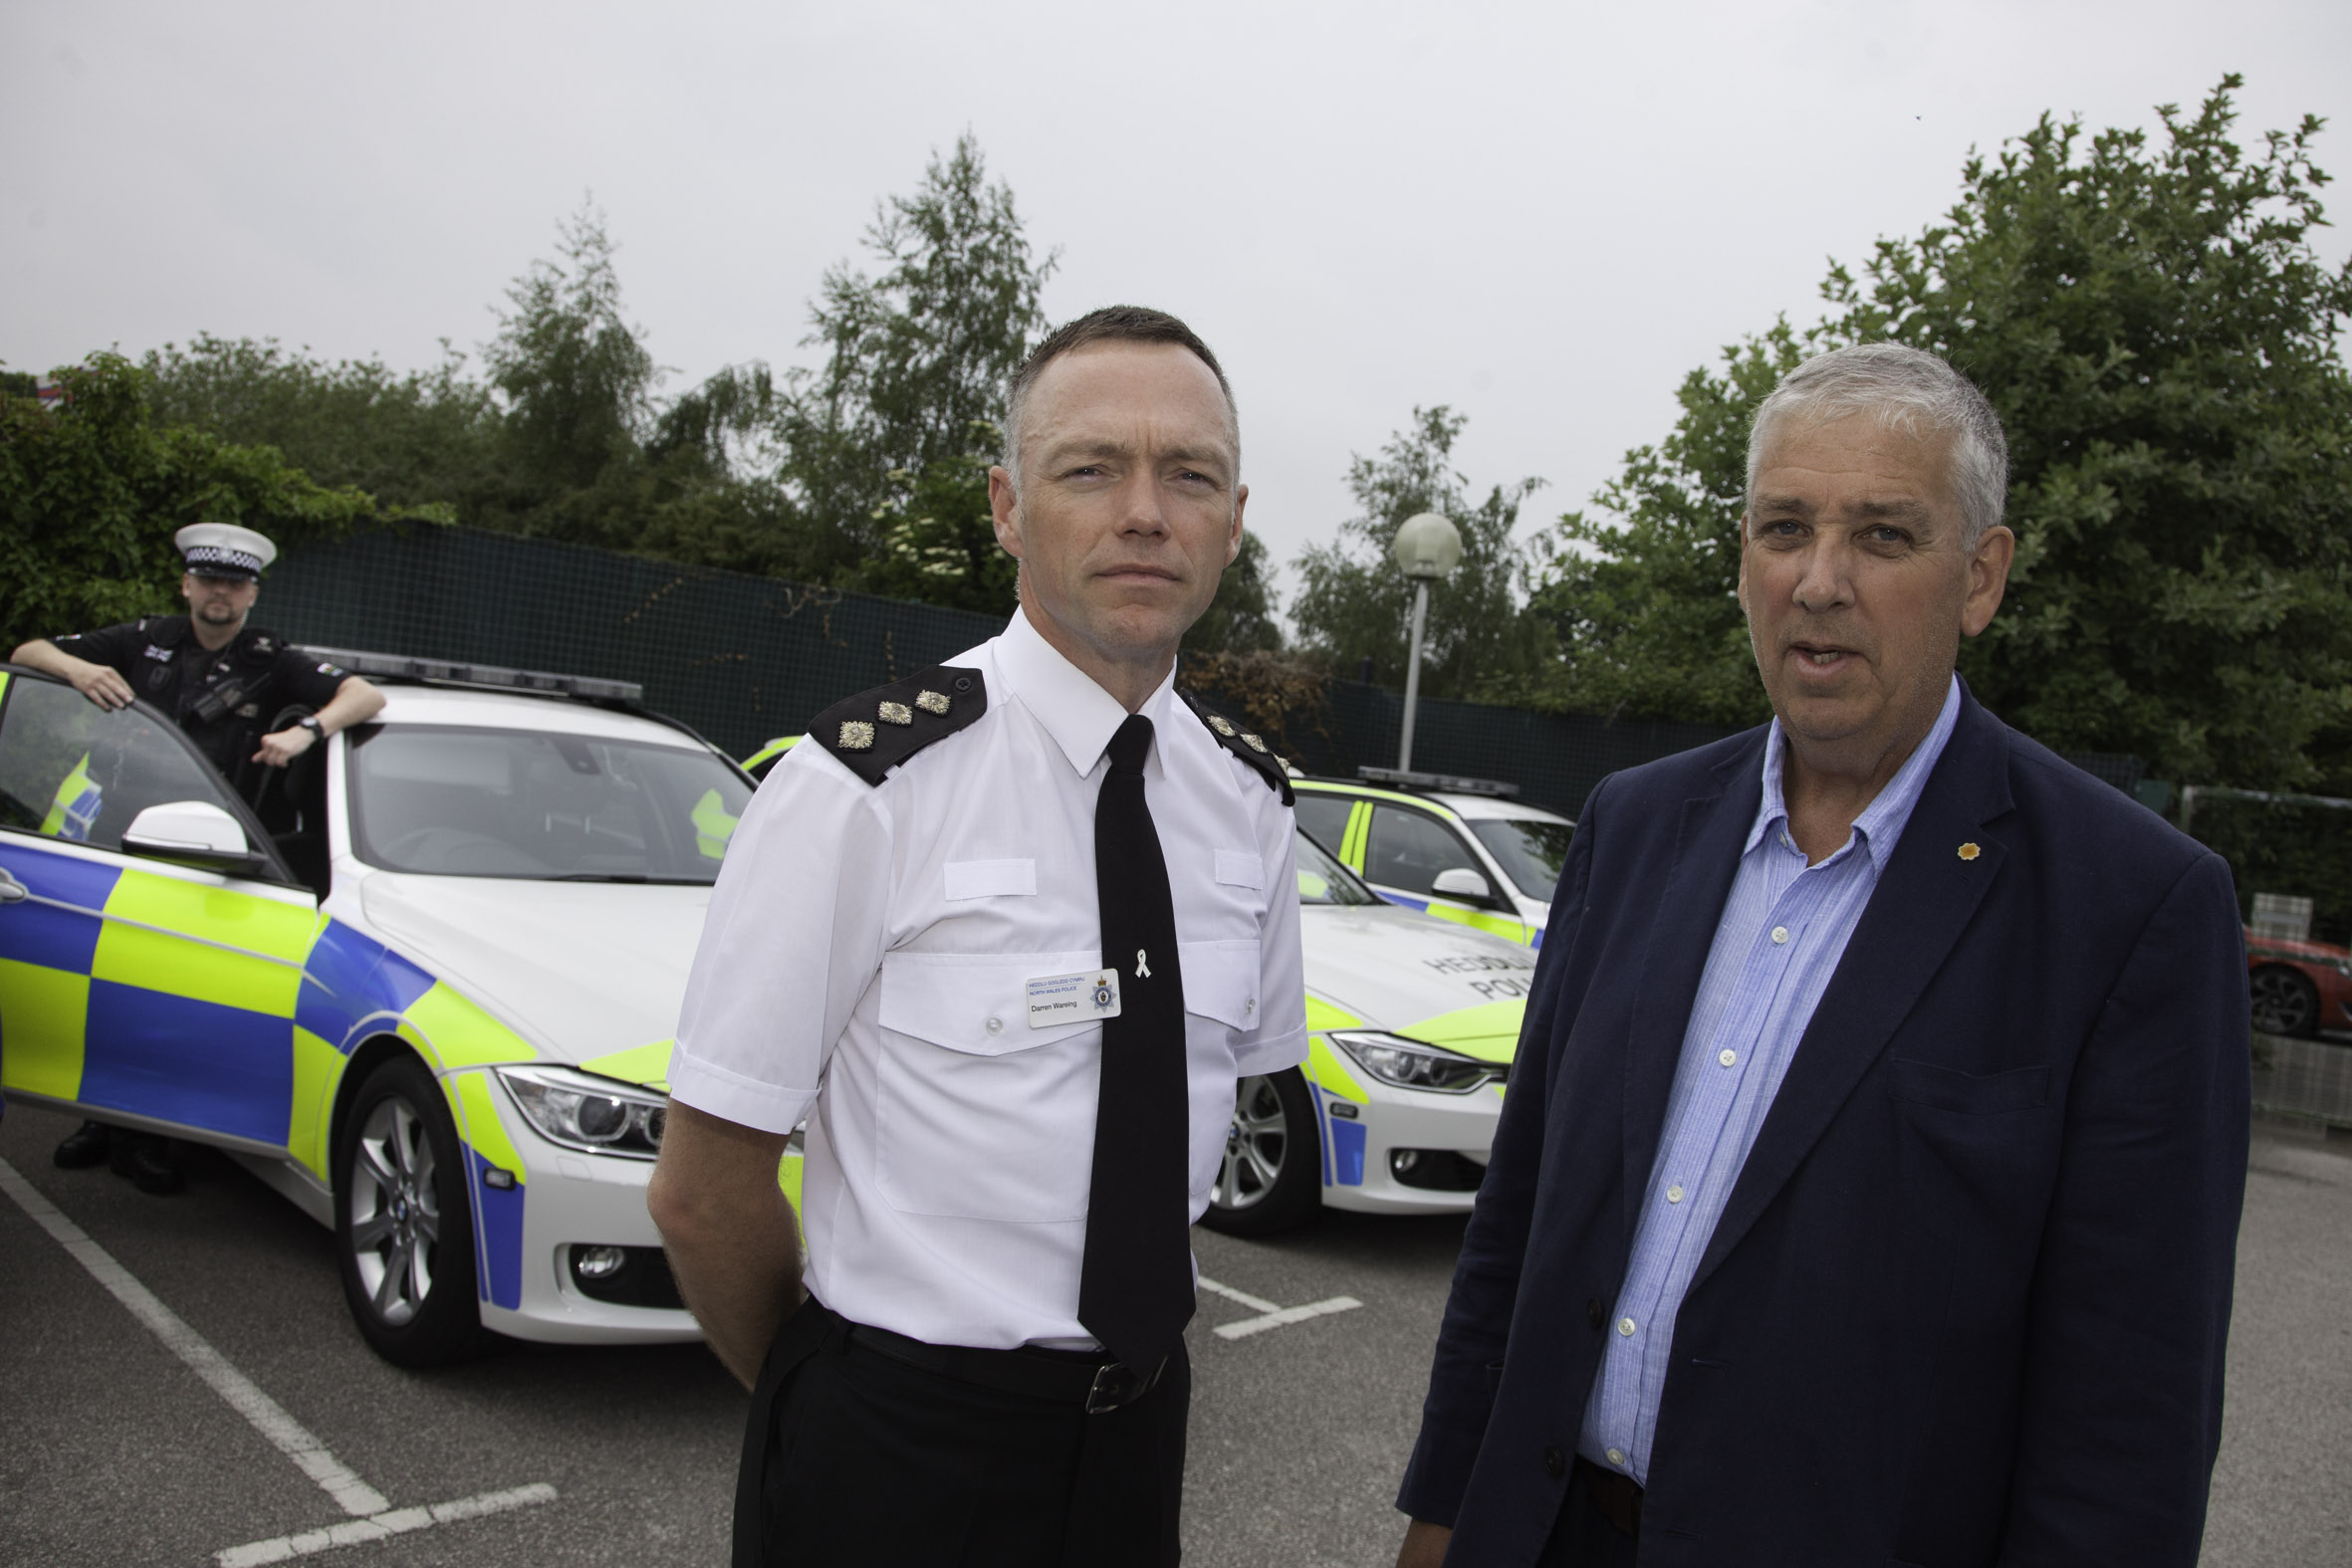 PCC  Arfon Jones at Roads Policing Unit in St Asaph. Pictured  are Chief Inspector Darren Wareing  and Police and Crime Commissioner  Arfon Jones  with PC 2766 Daniel Edwards.